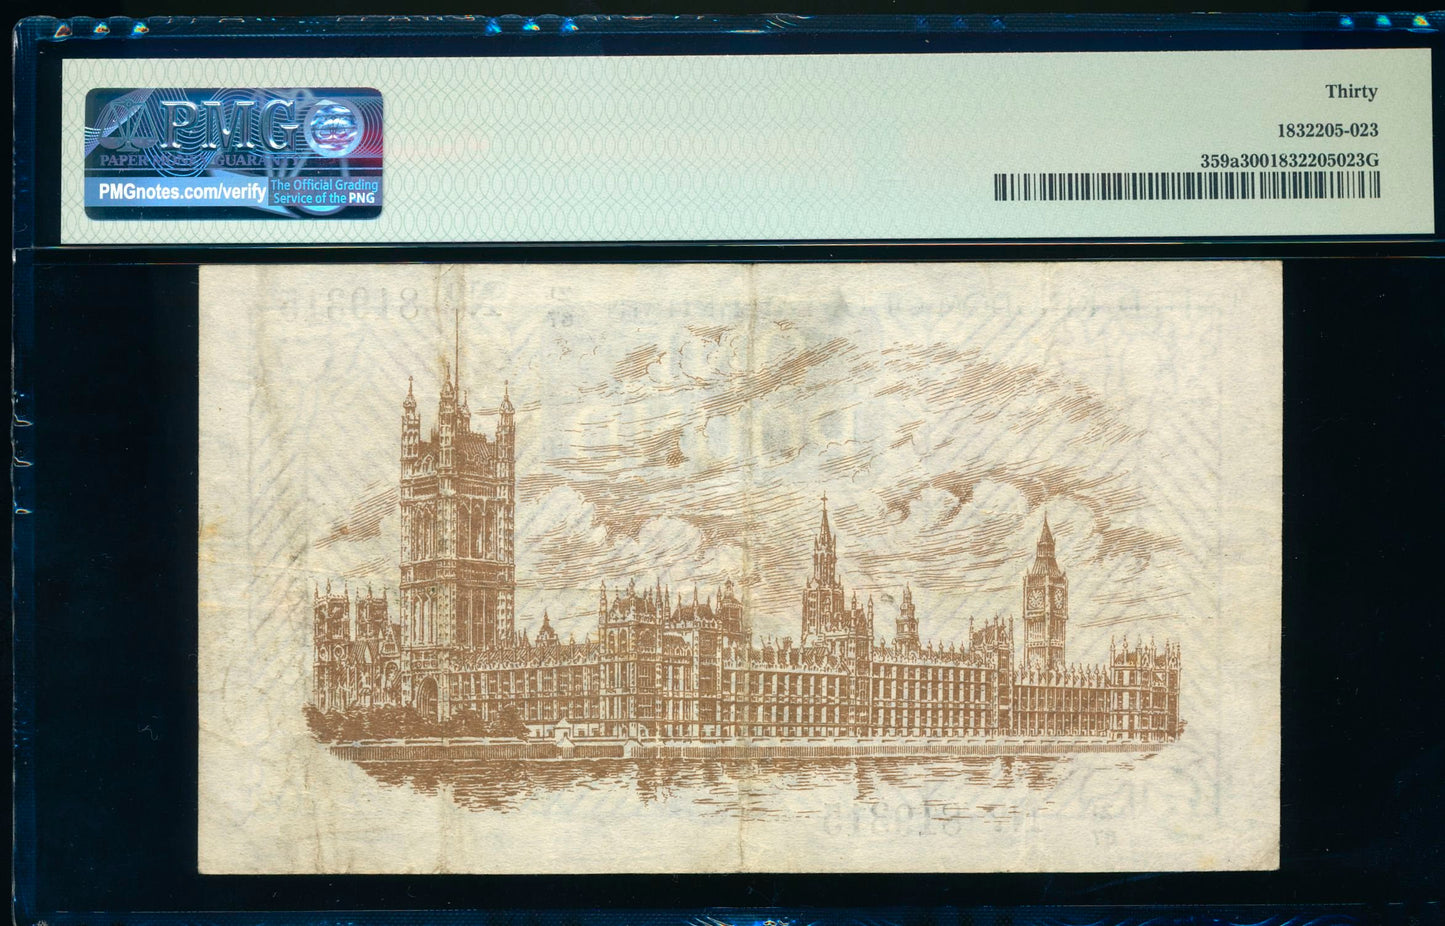 ENGLAND P.359a T31.3 1923 HM Treasury Fisher £1 Control note Z(1)67 VF 30